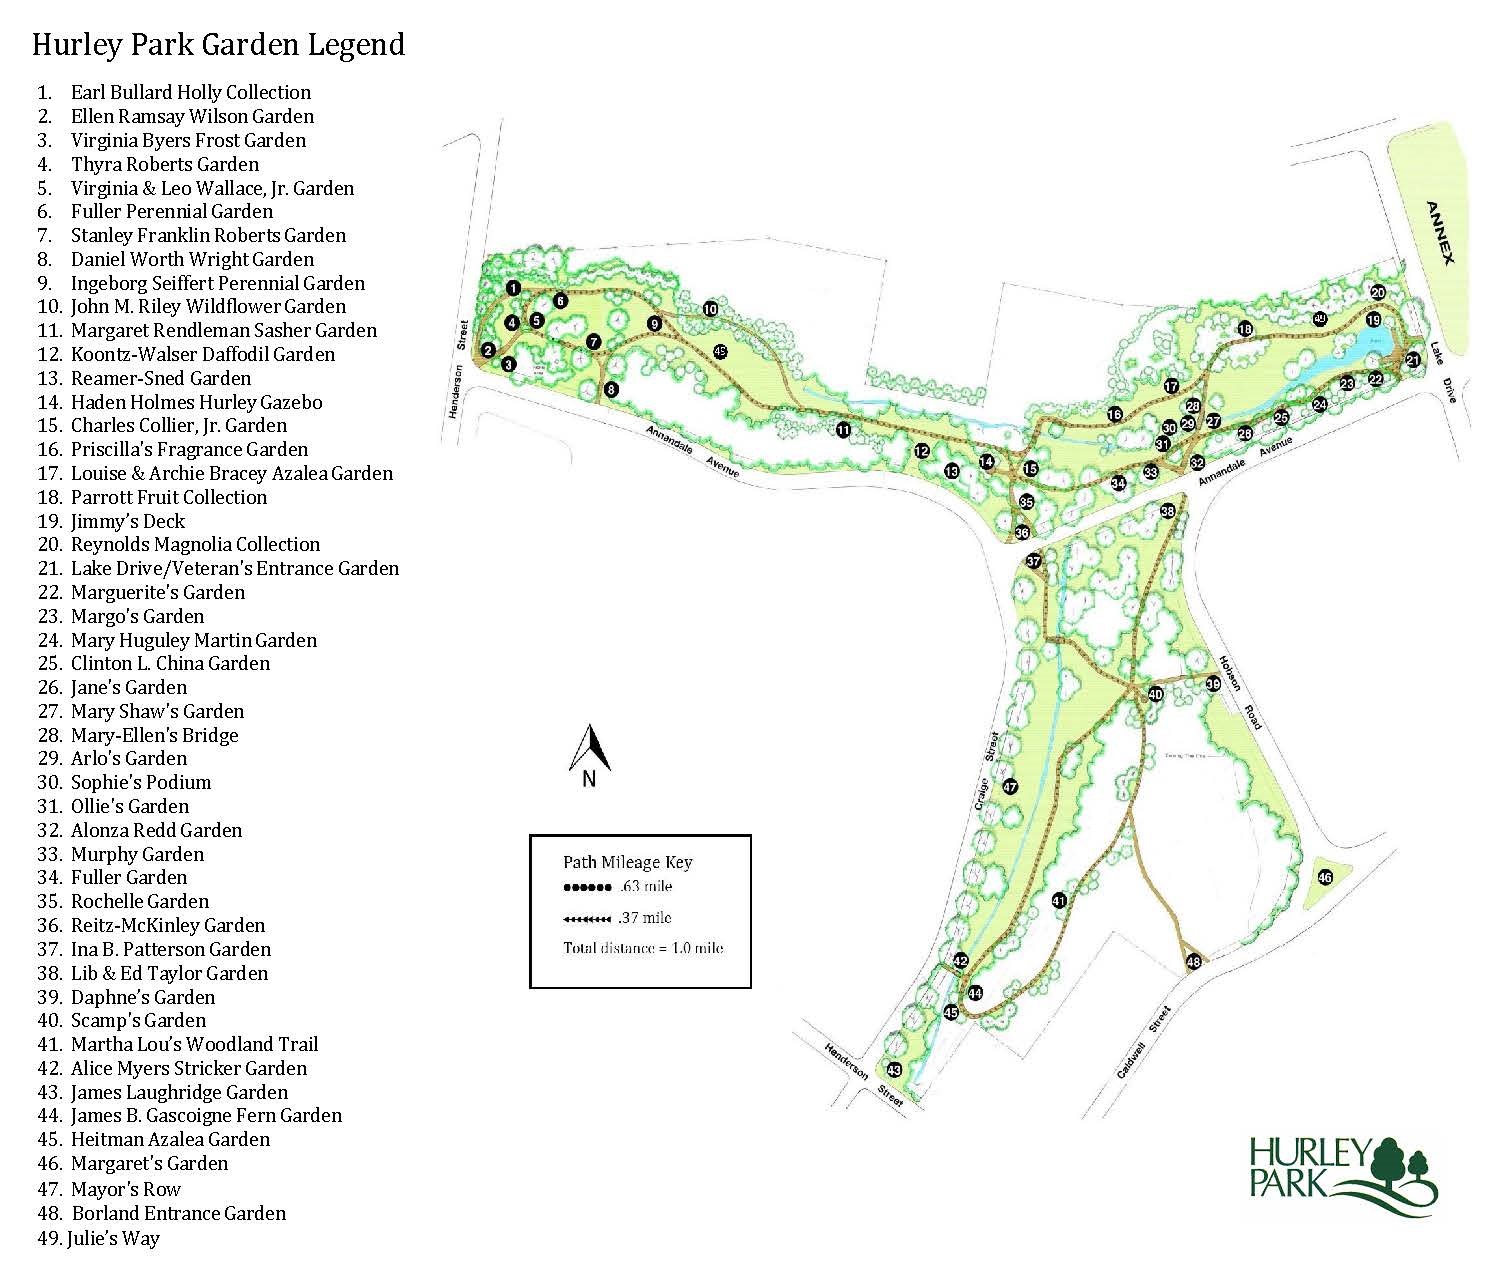 Map of Hurley Park Gardens